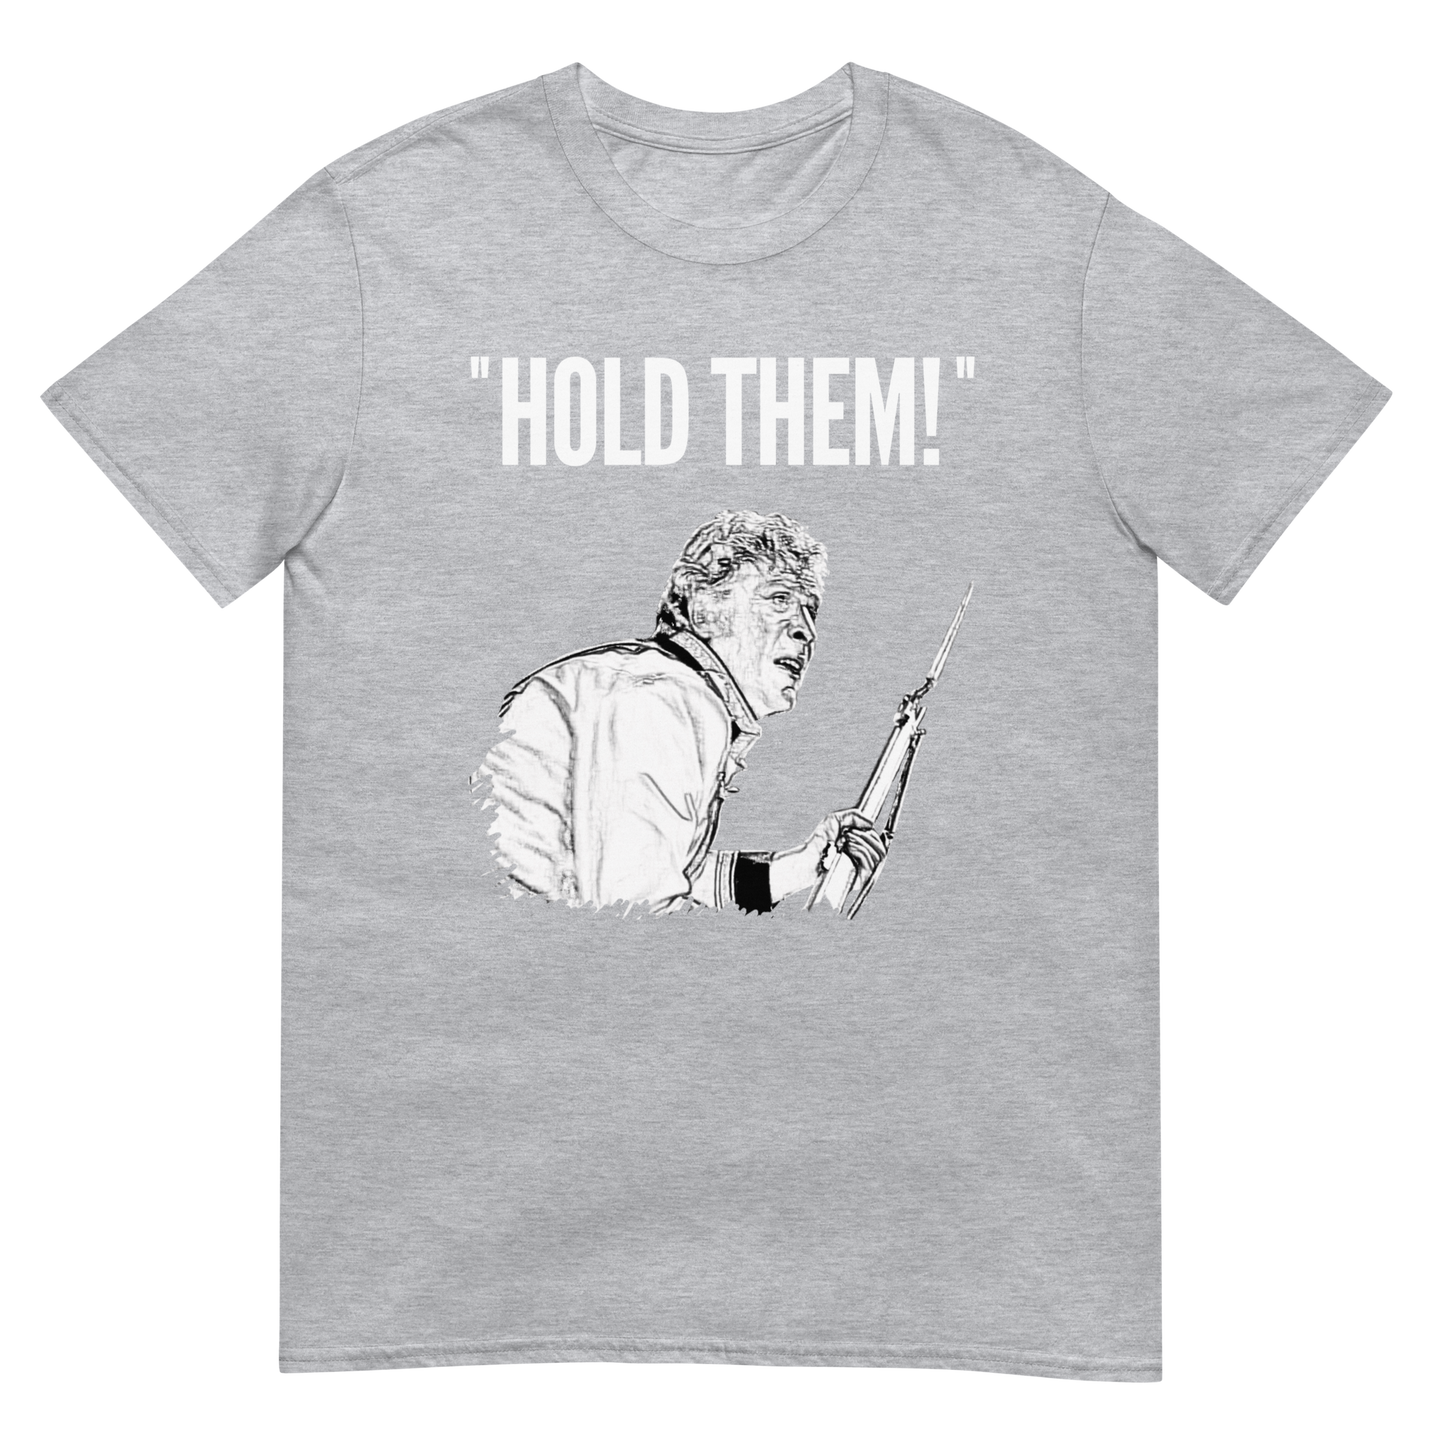 "Hold Them!" - Bromhead Sketch (t-shirt)